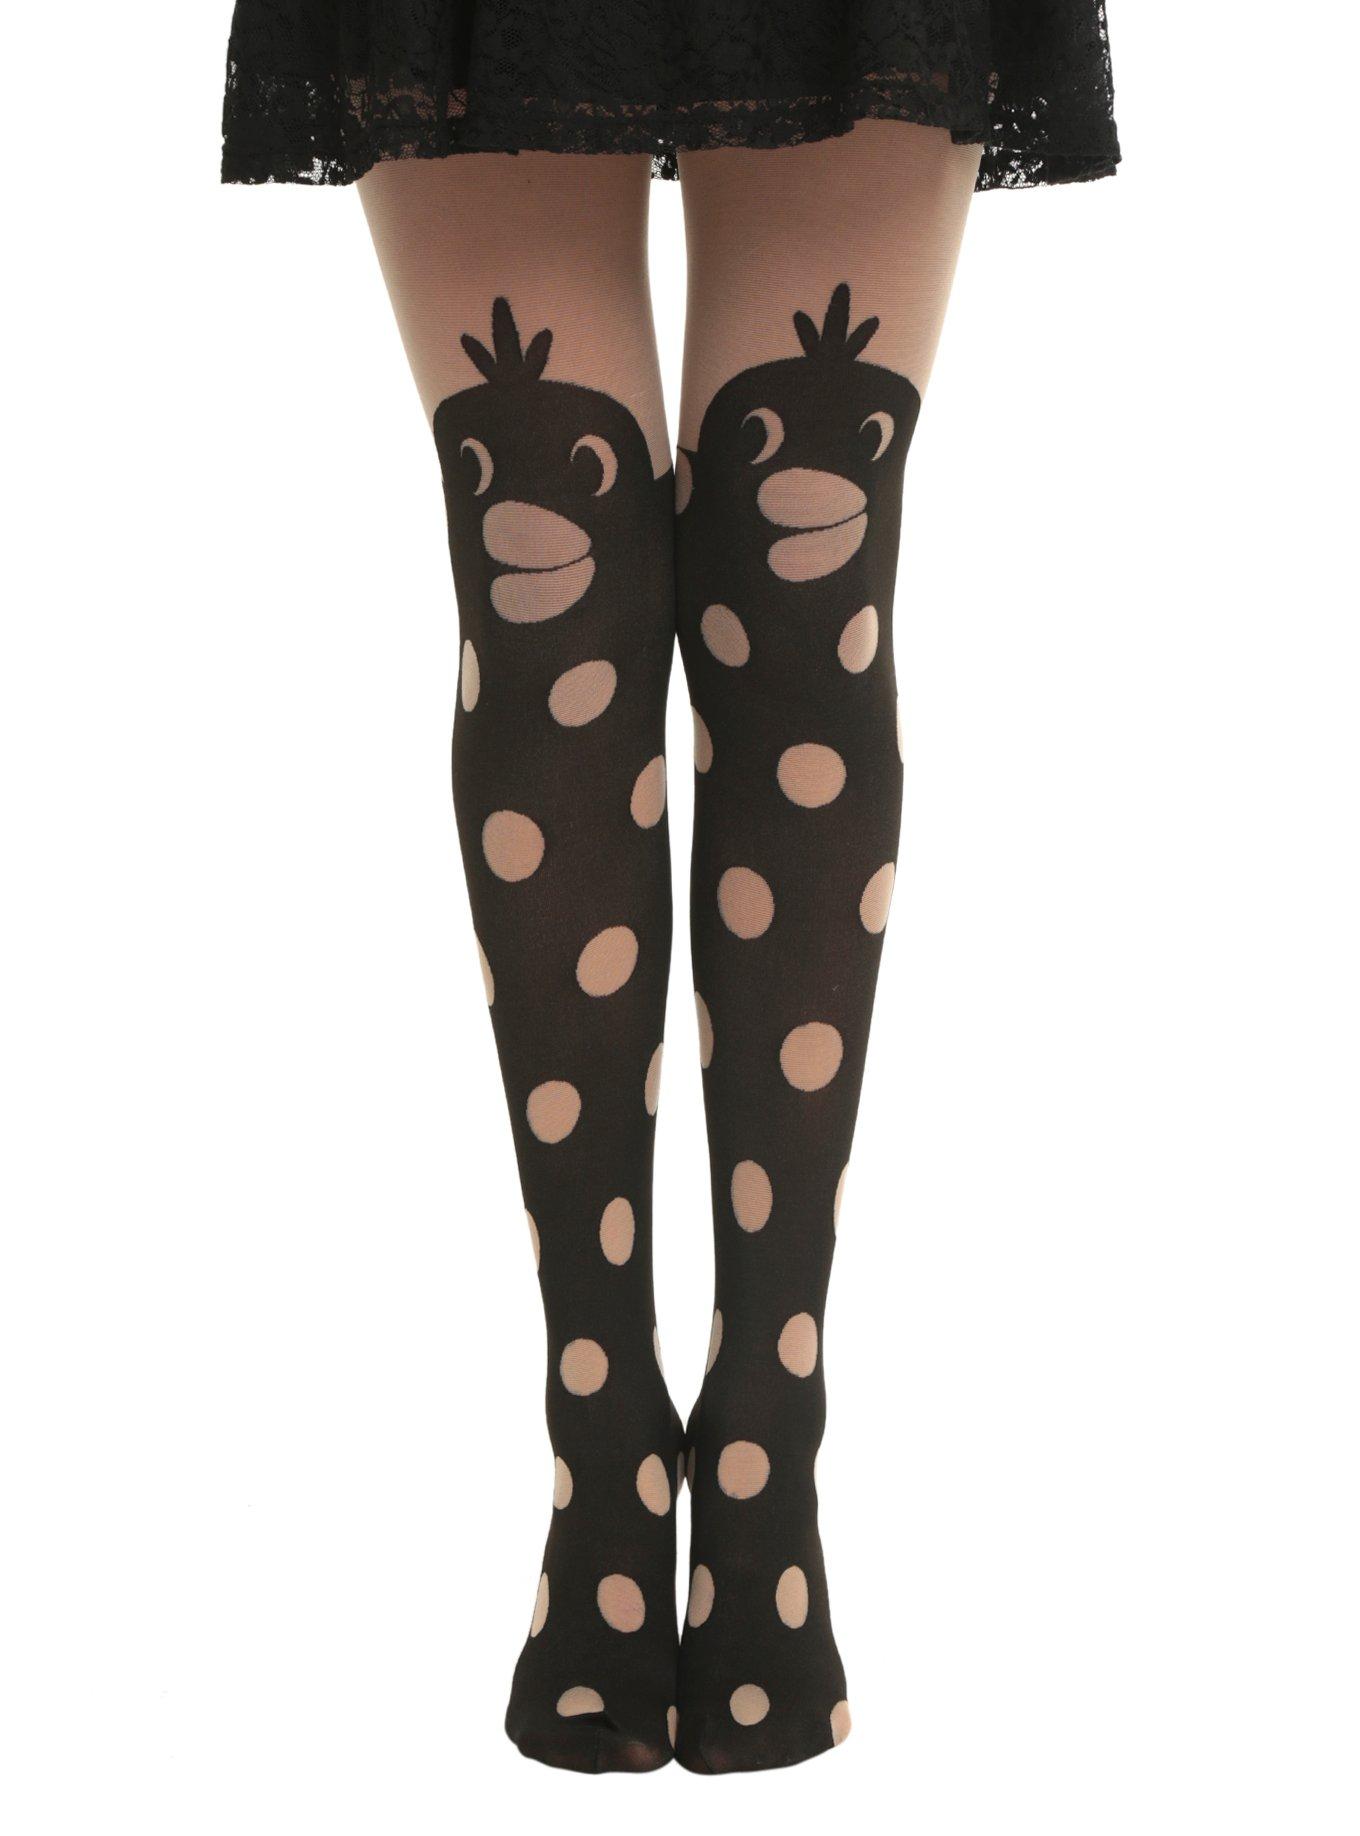 Lovesick Duck Polka Dot Faux Thigh High Tights Hot Topic